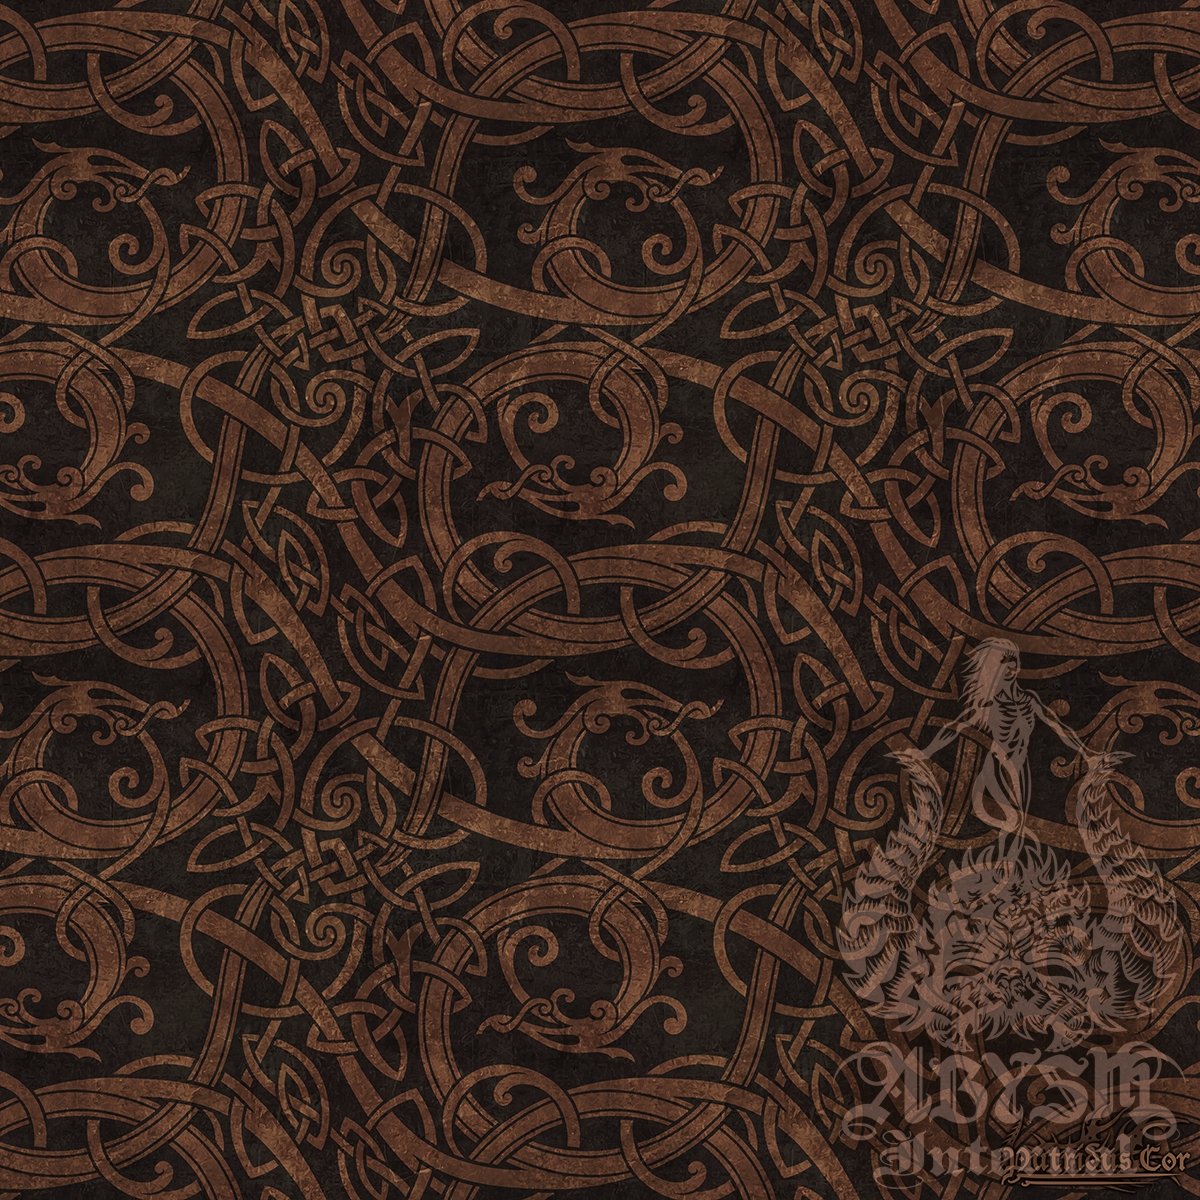 Viking art, Custom knotwork, Seamless patterns for merch, music covers, tattoos, poster events, backgrounds - Graphic Design